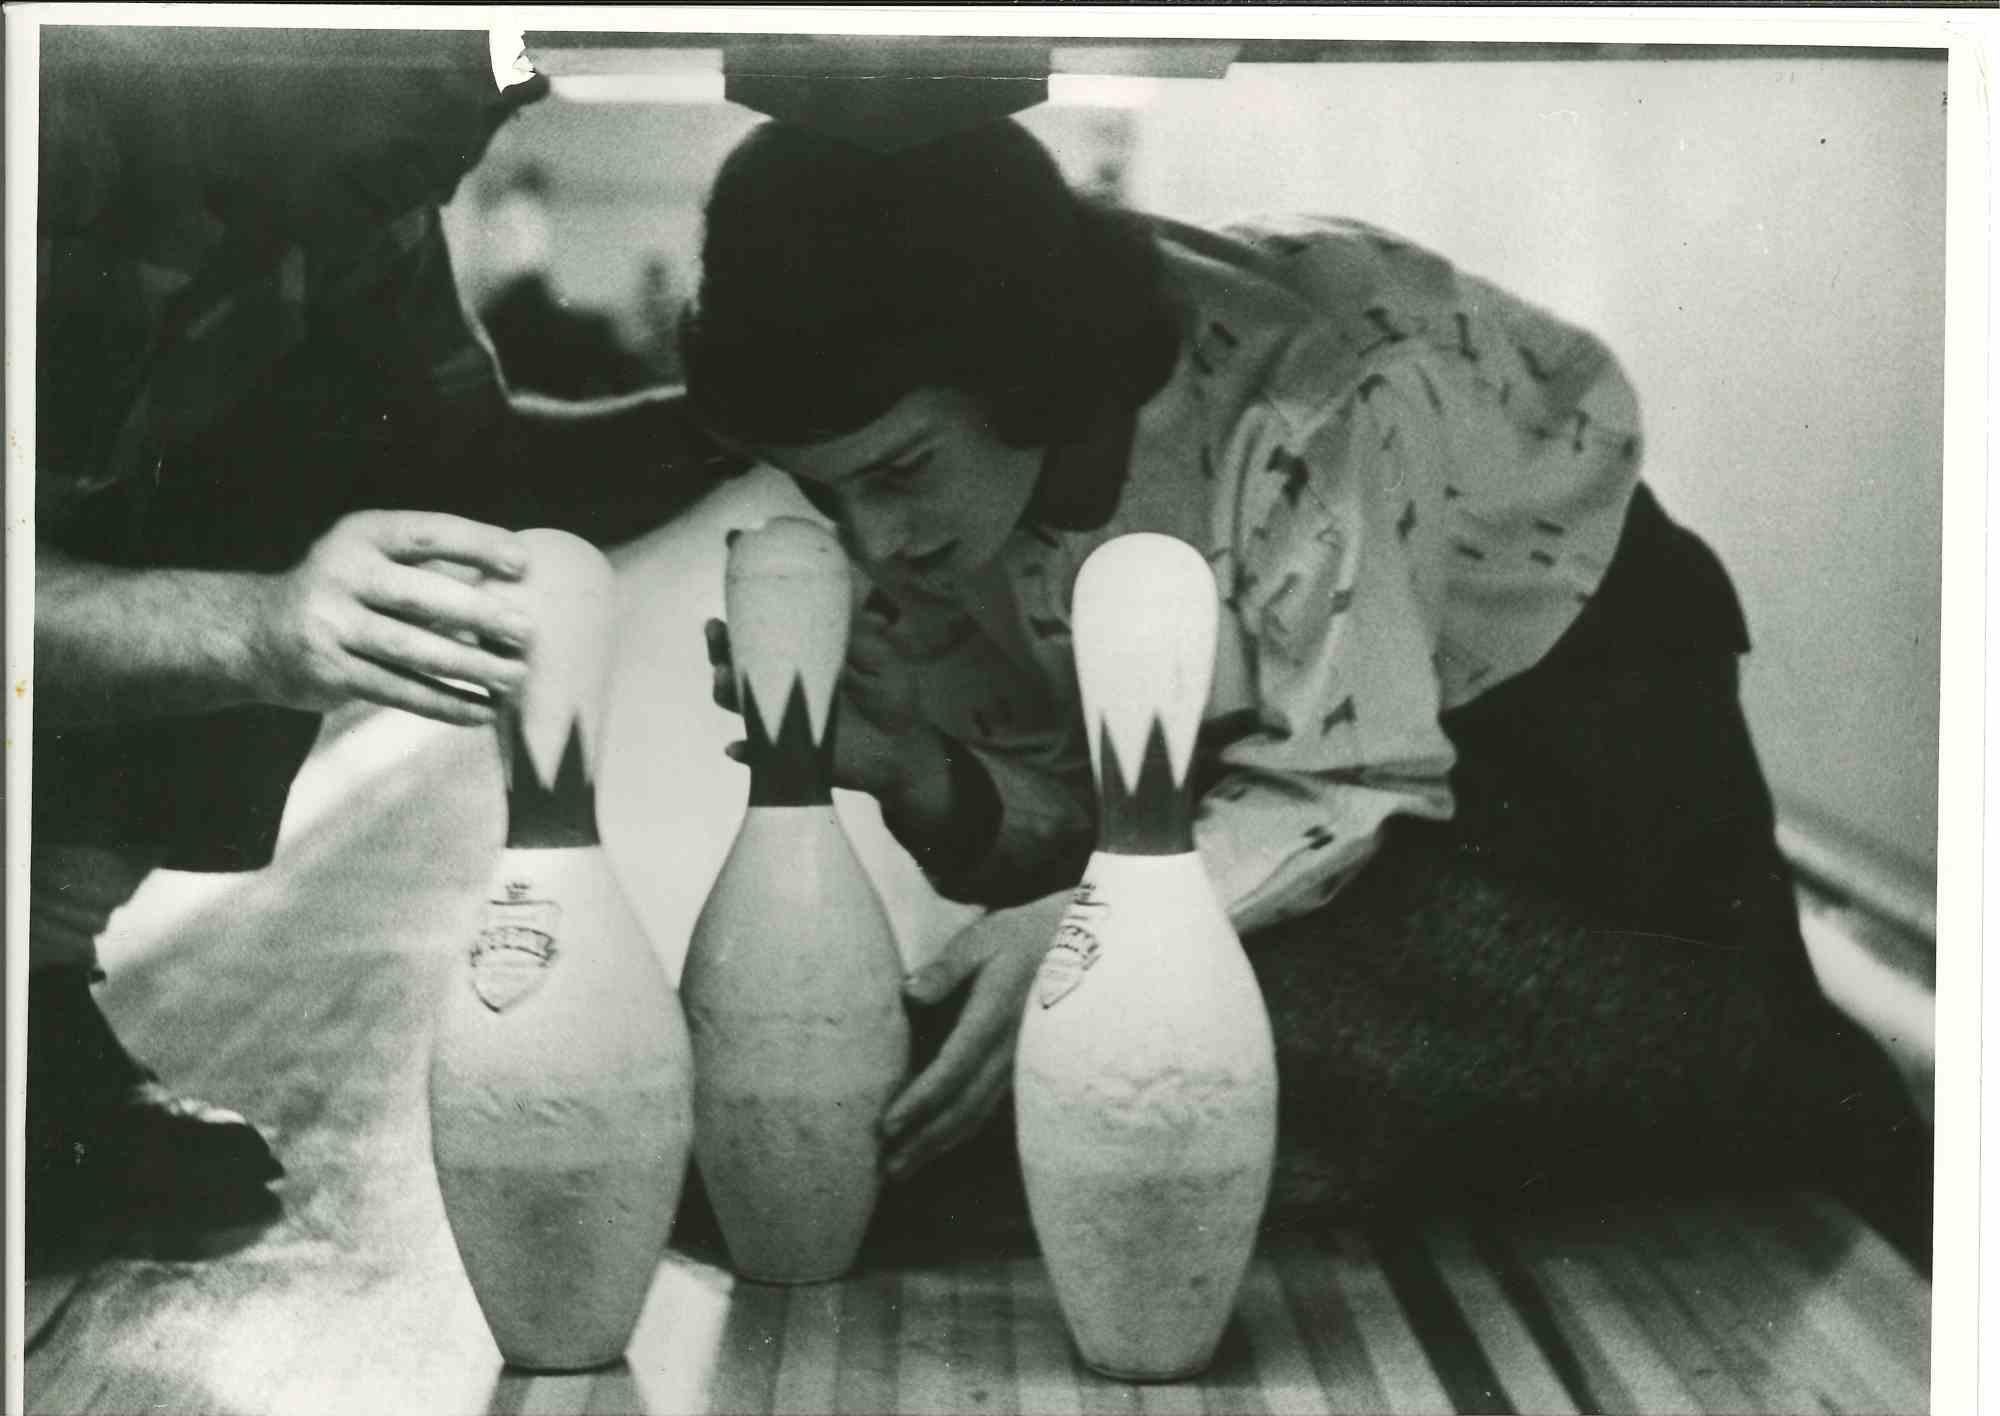 Unknown Figurative Photograph - Bowling - American Vintage Photograph - Mid 20th Century